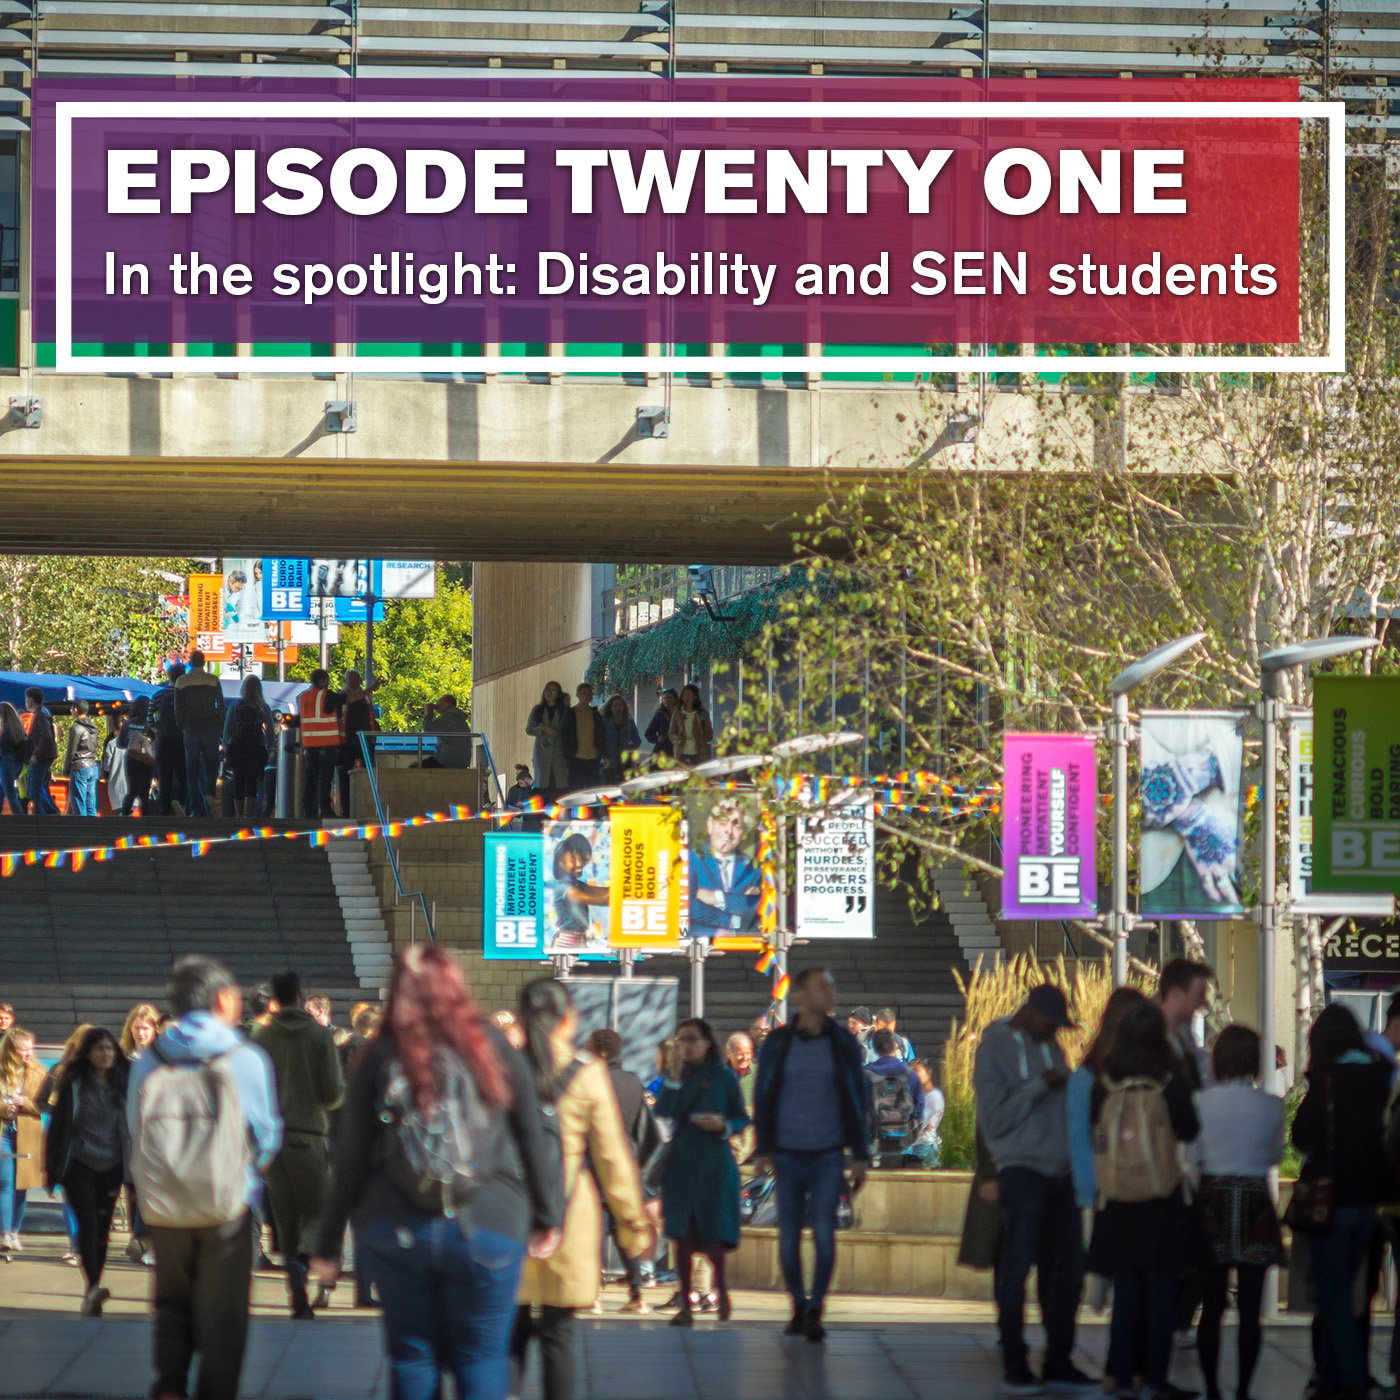 In The Spotlight: Disability and SEN Support at University